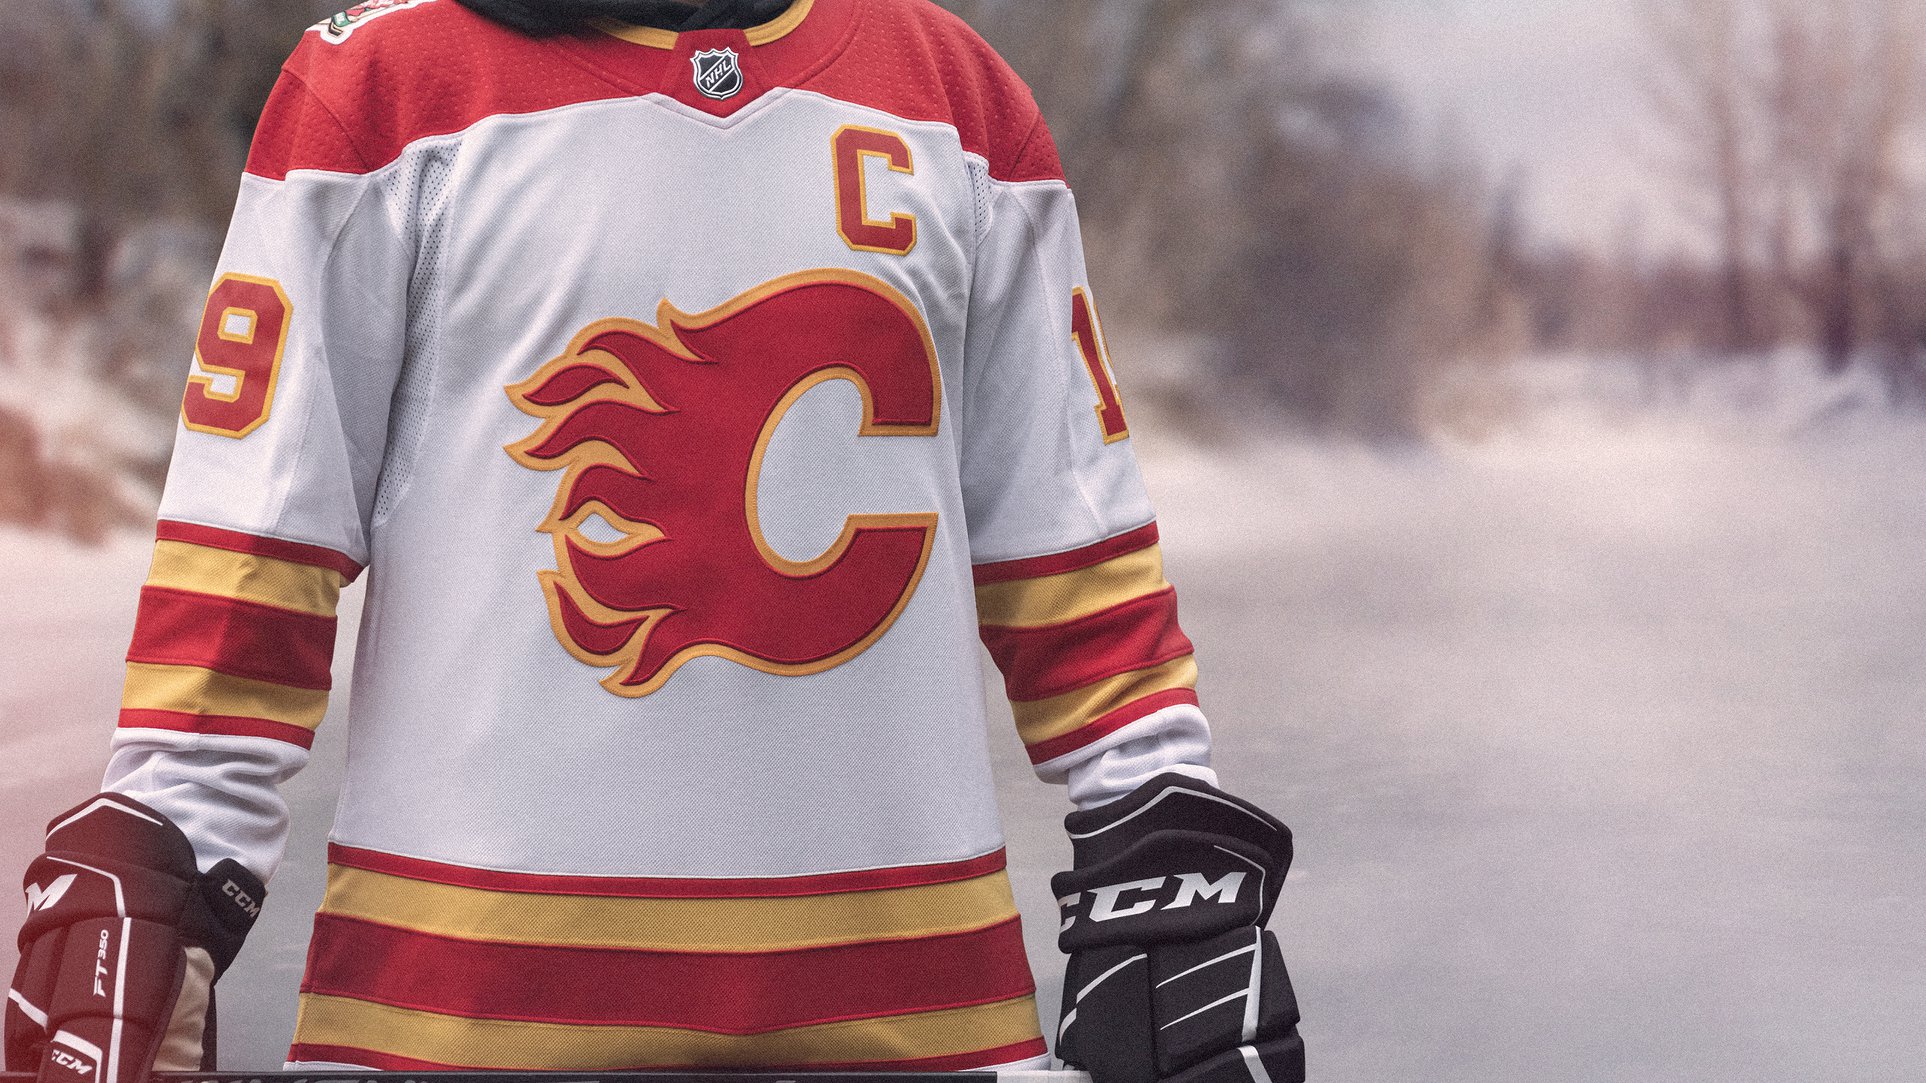 heritage classic flames jersey